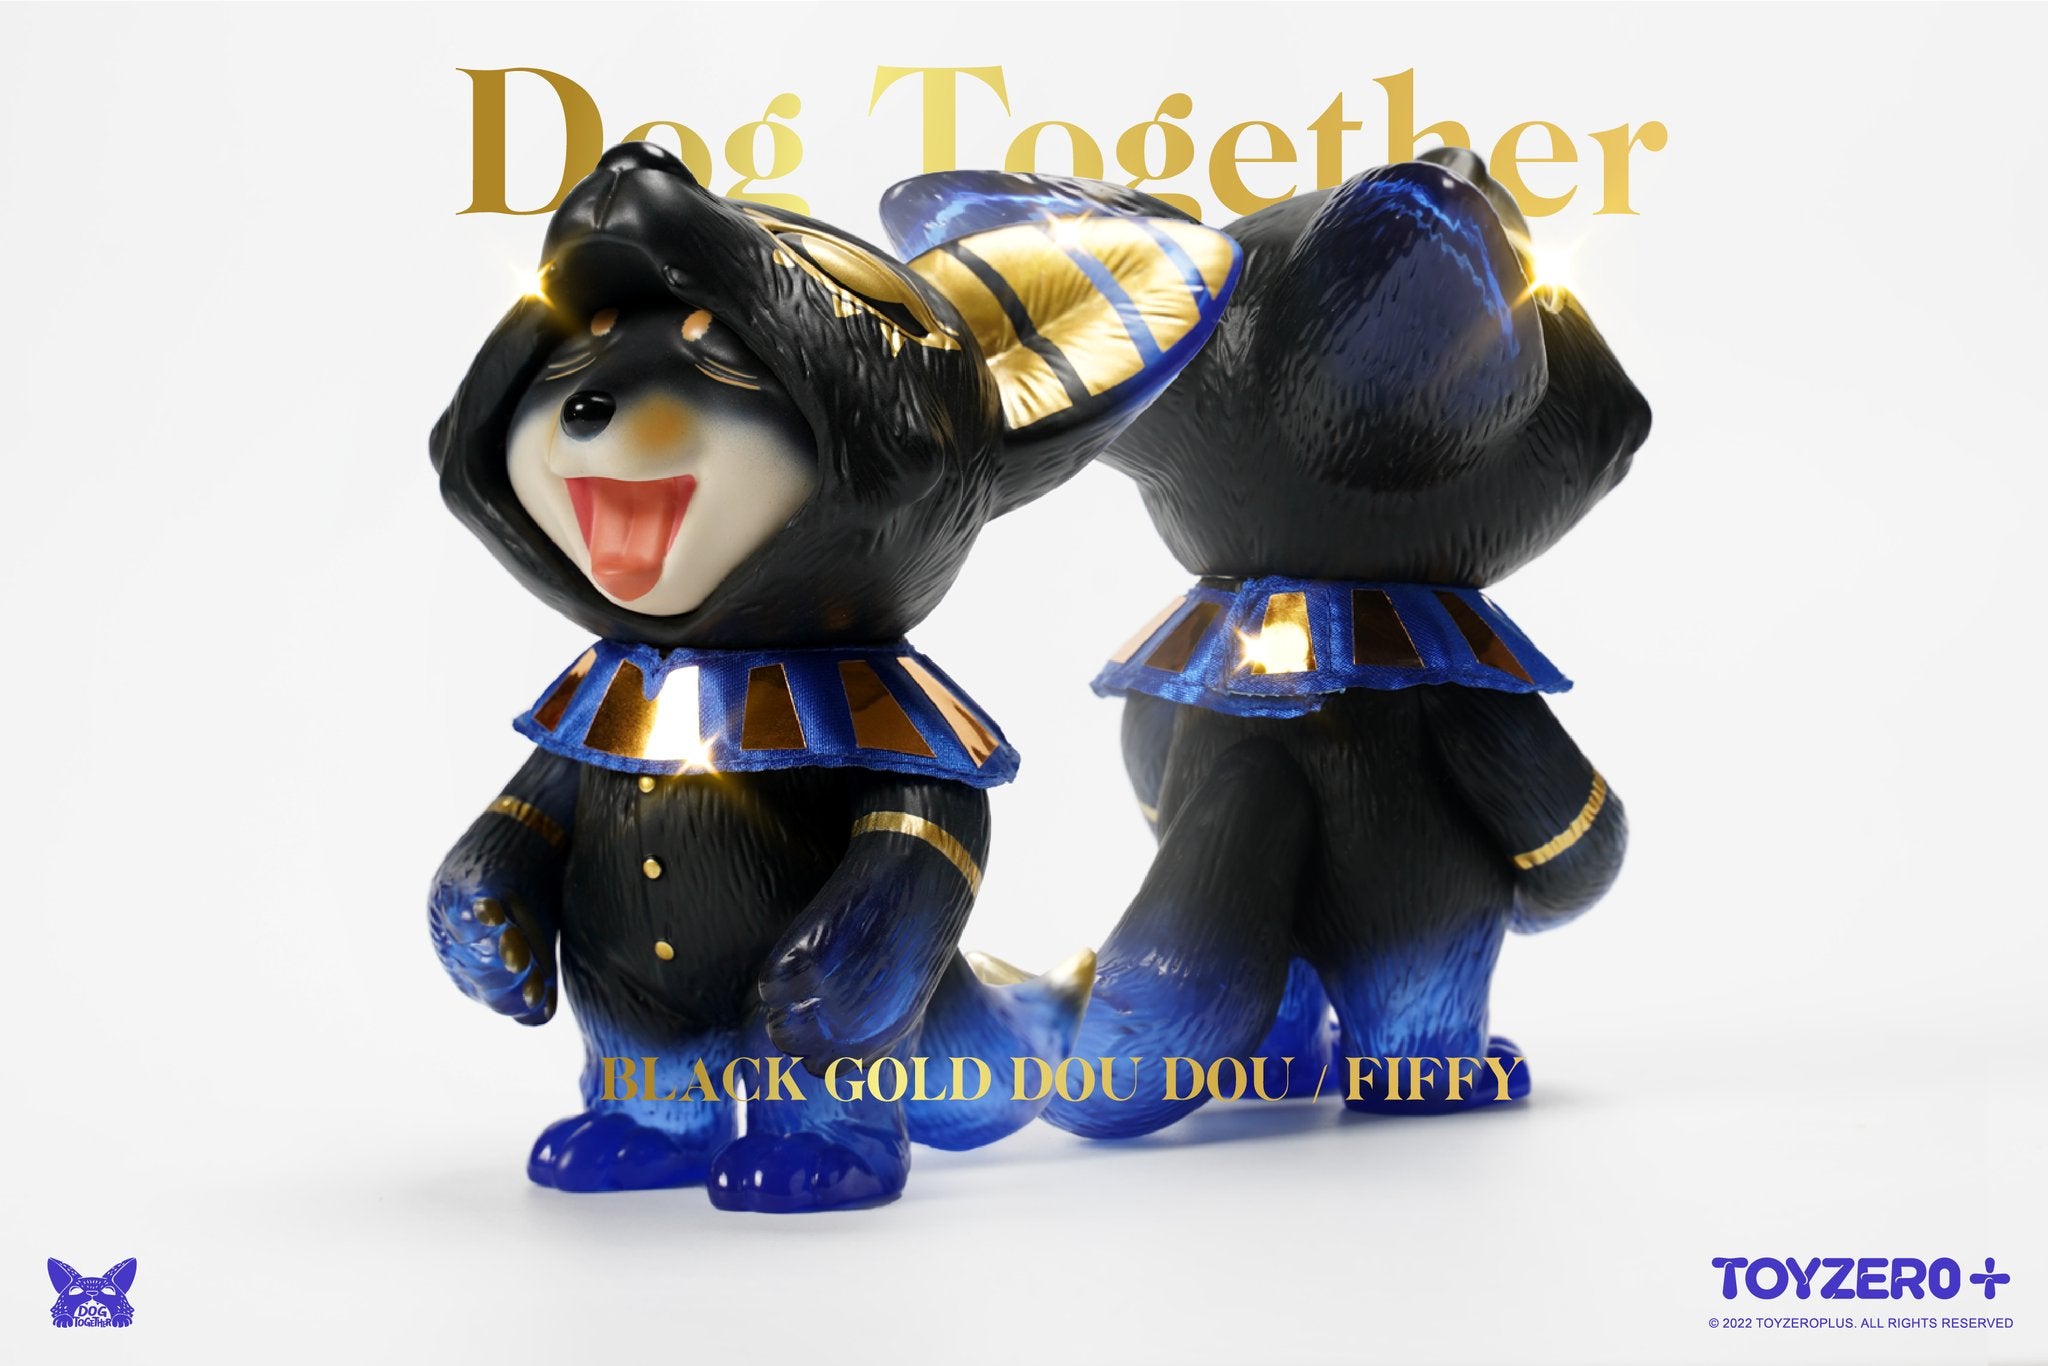 Dou Dou & Fiffy - Black Gold Edition by Dog Together